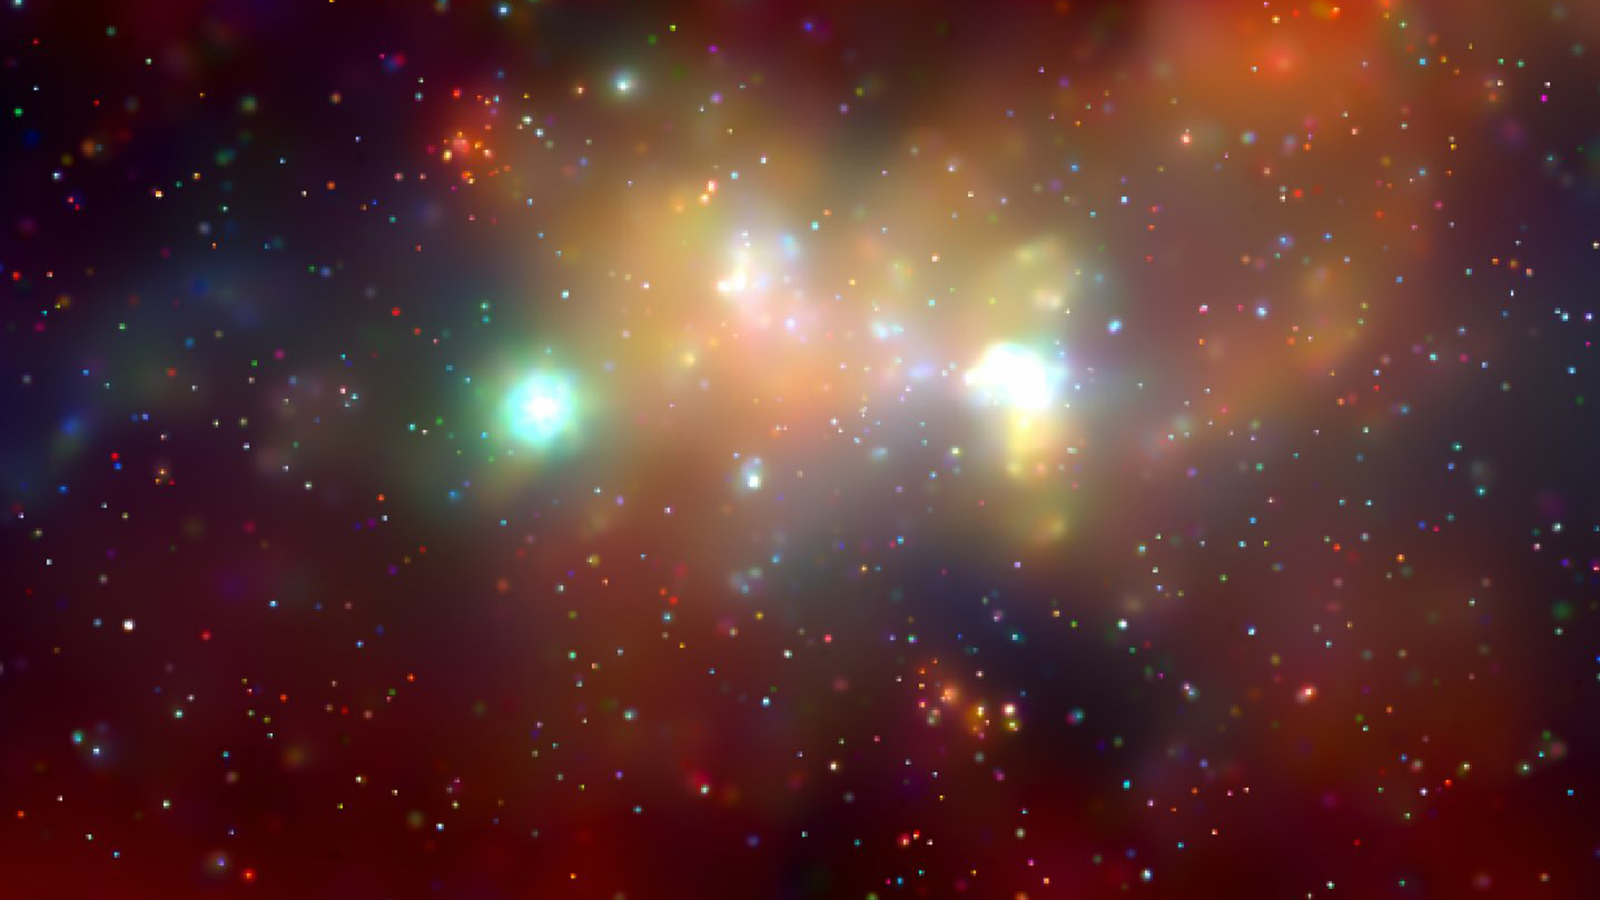 Colorful image of galactic center